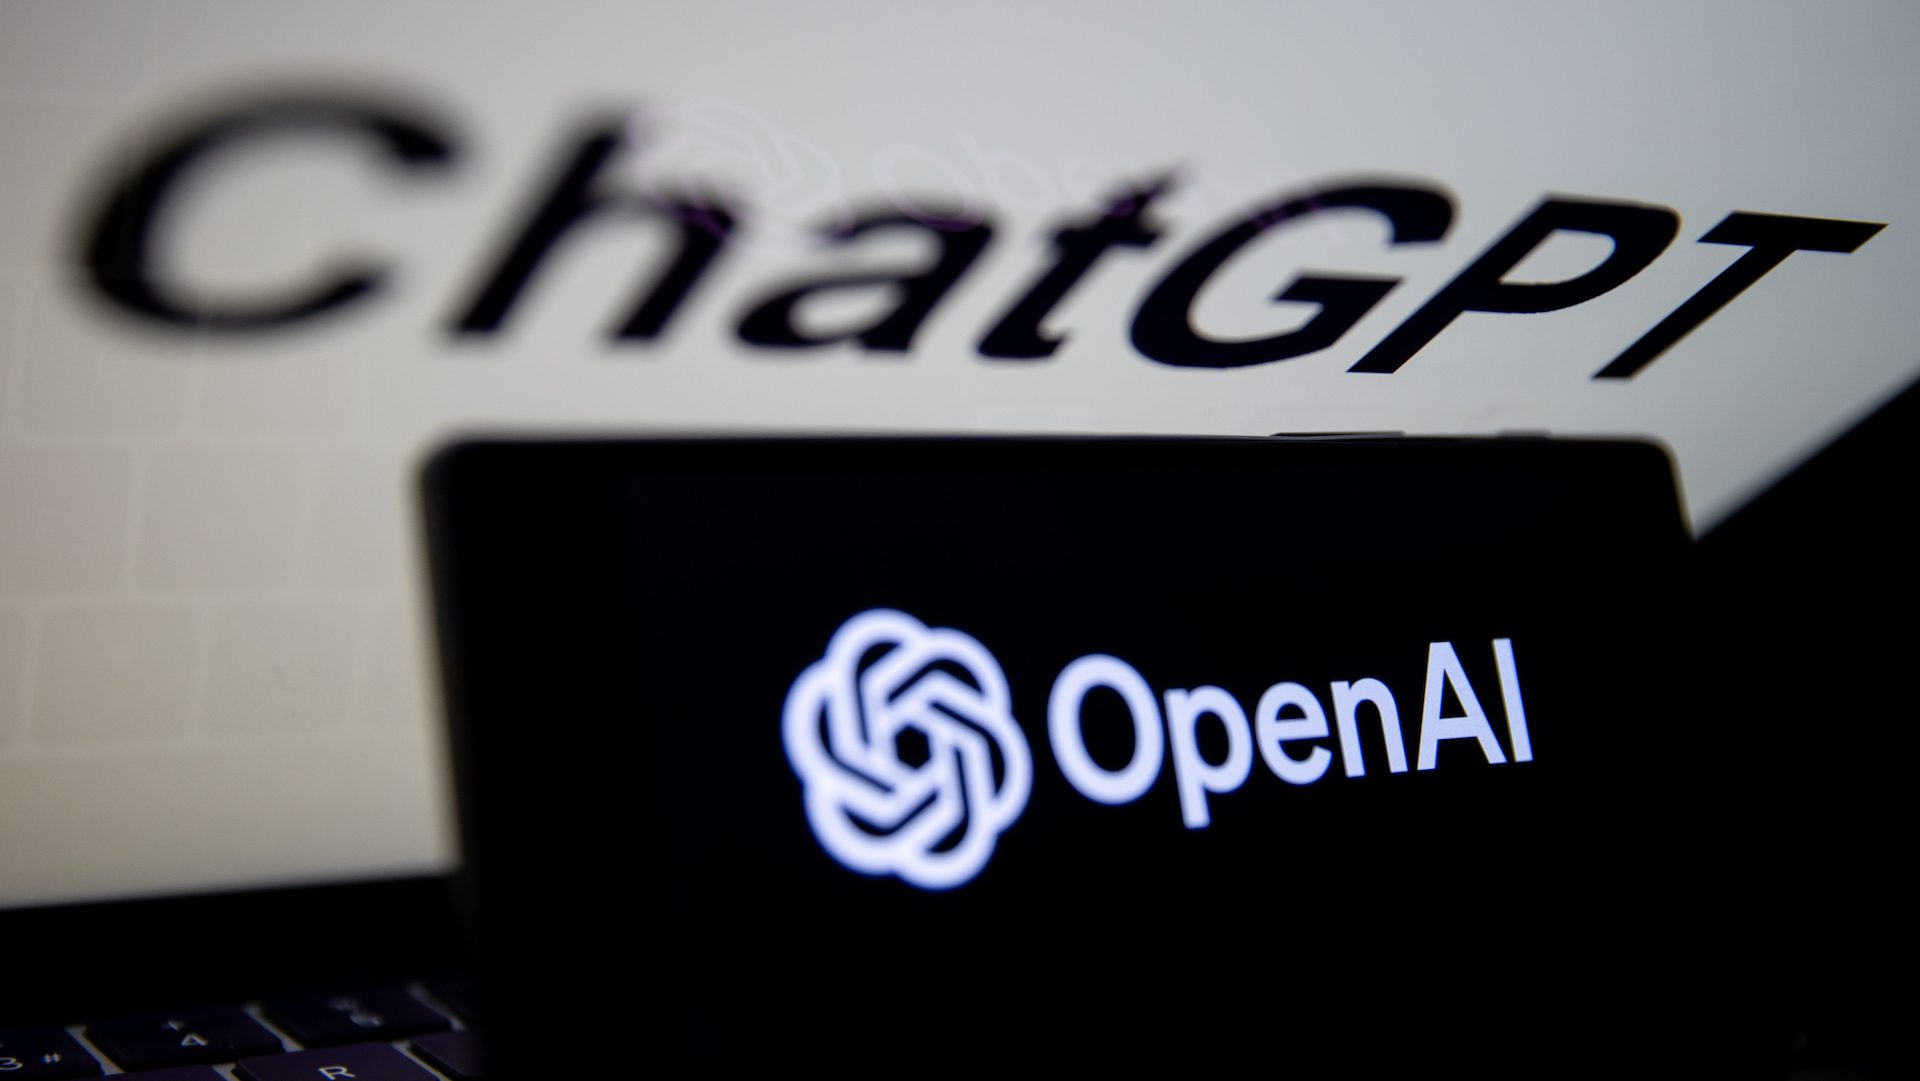 OpenAI logo is actuality displayed on a adaptable buzz awning in advanced of computer awning with the logo of ChatGPT